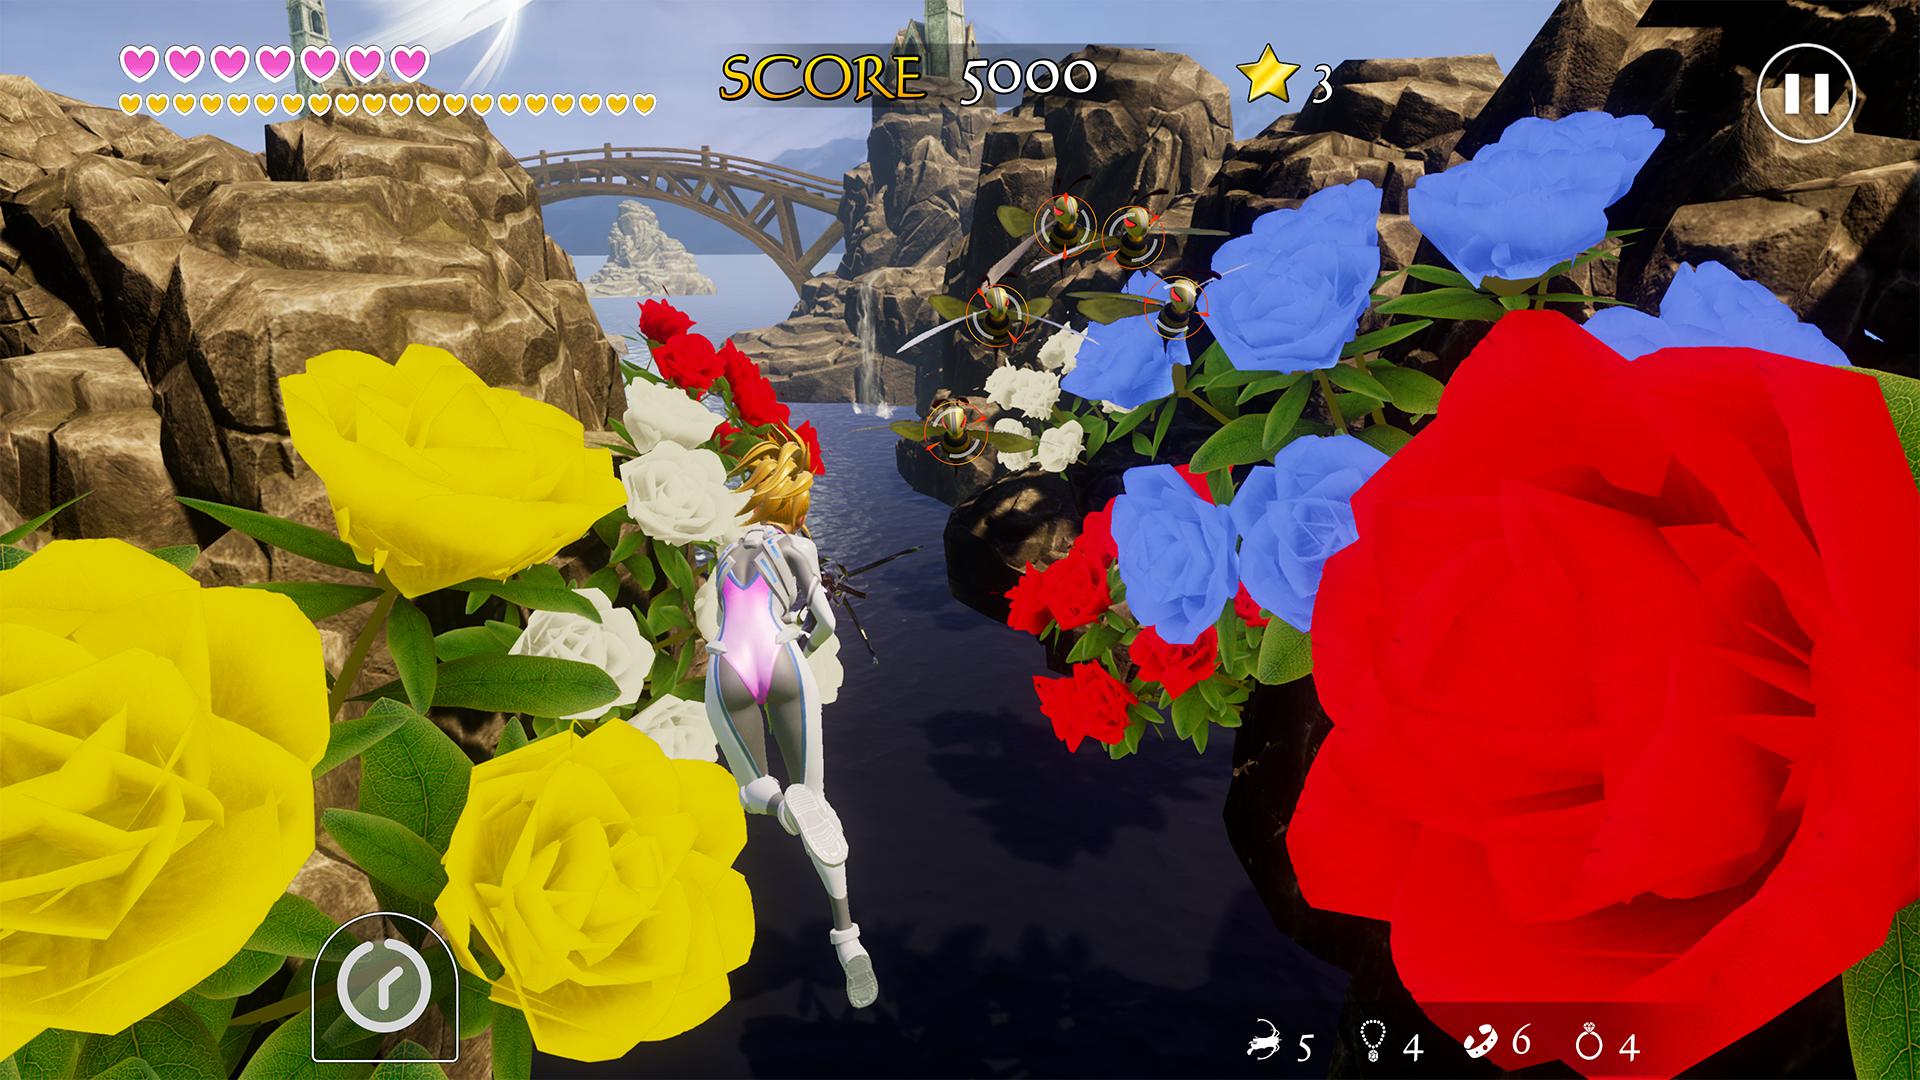 A fairytale stage in Air Twister, depicting massive, colorful flowers.